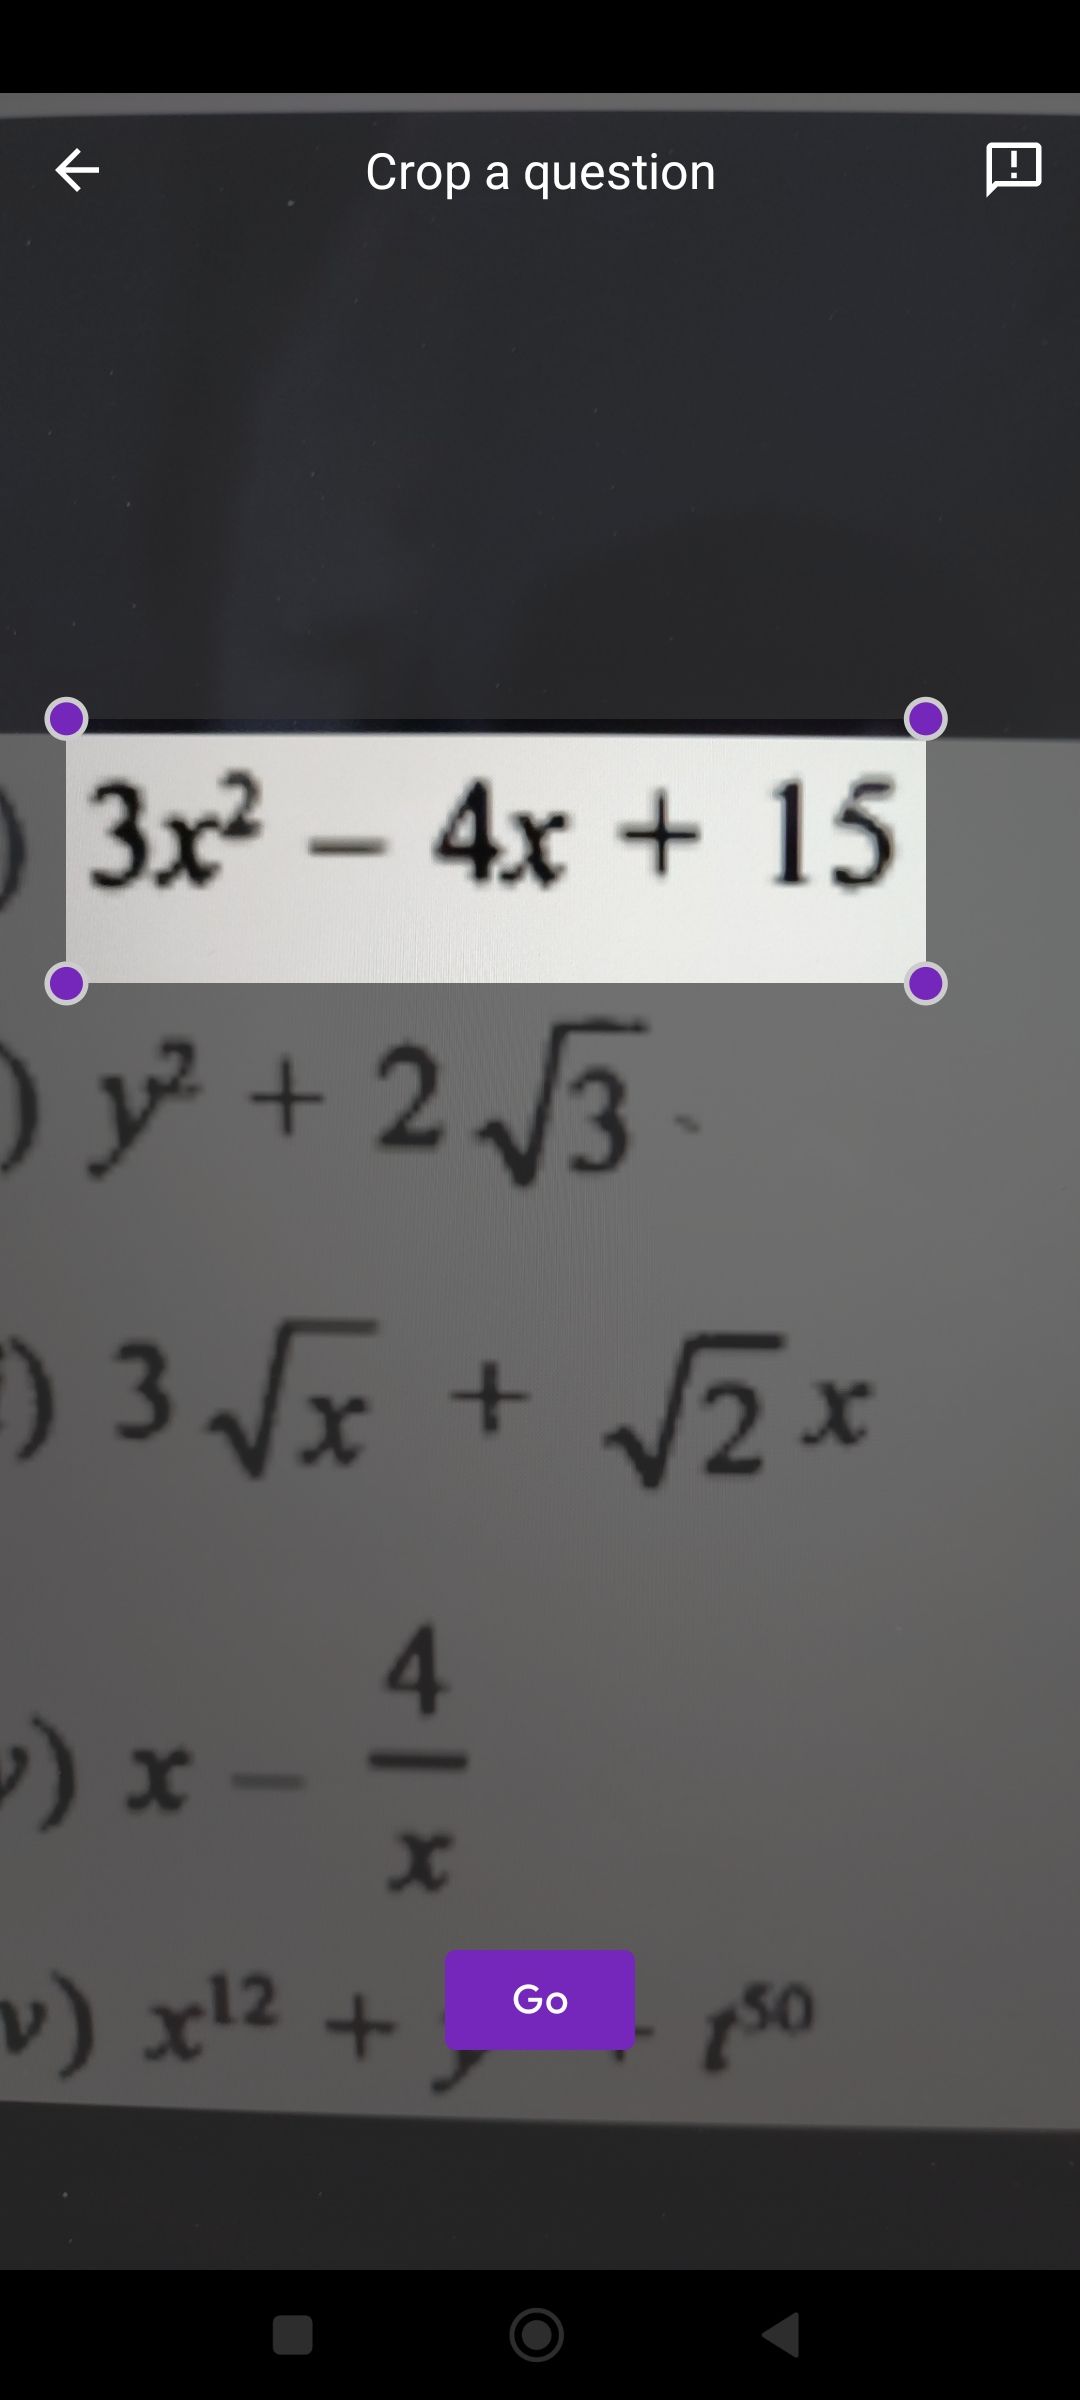 Socratic by Google app scanning an equation